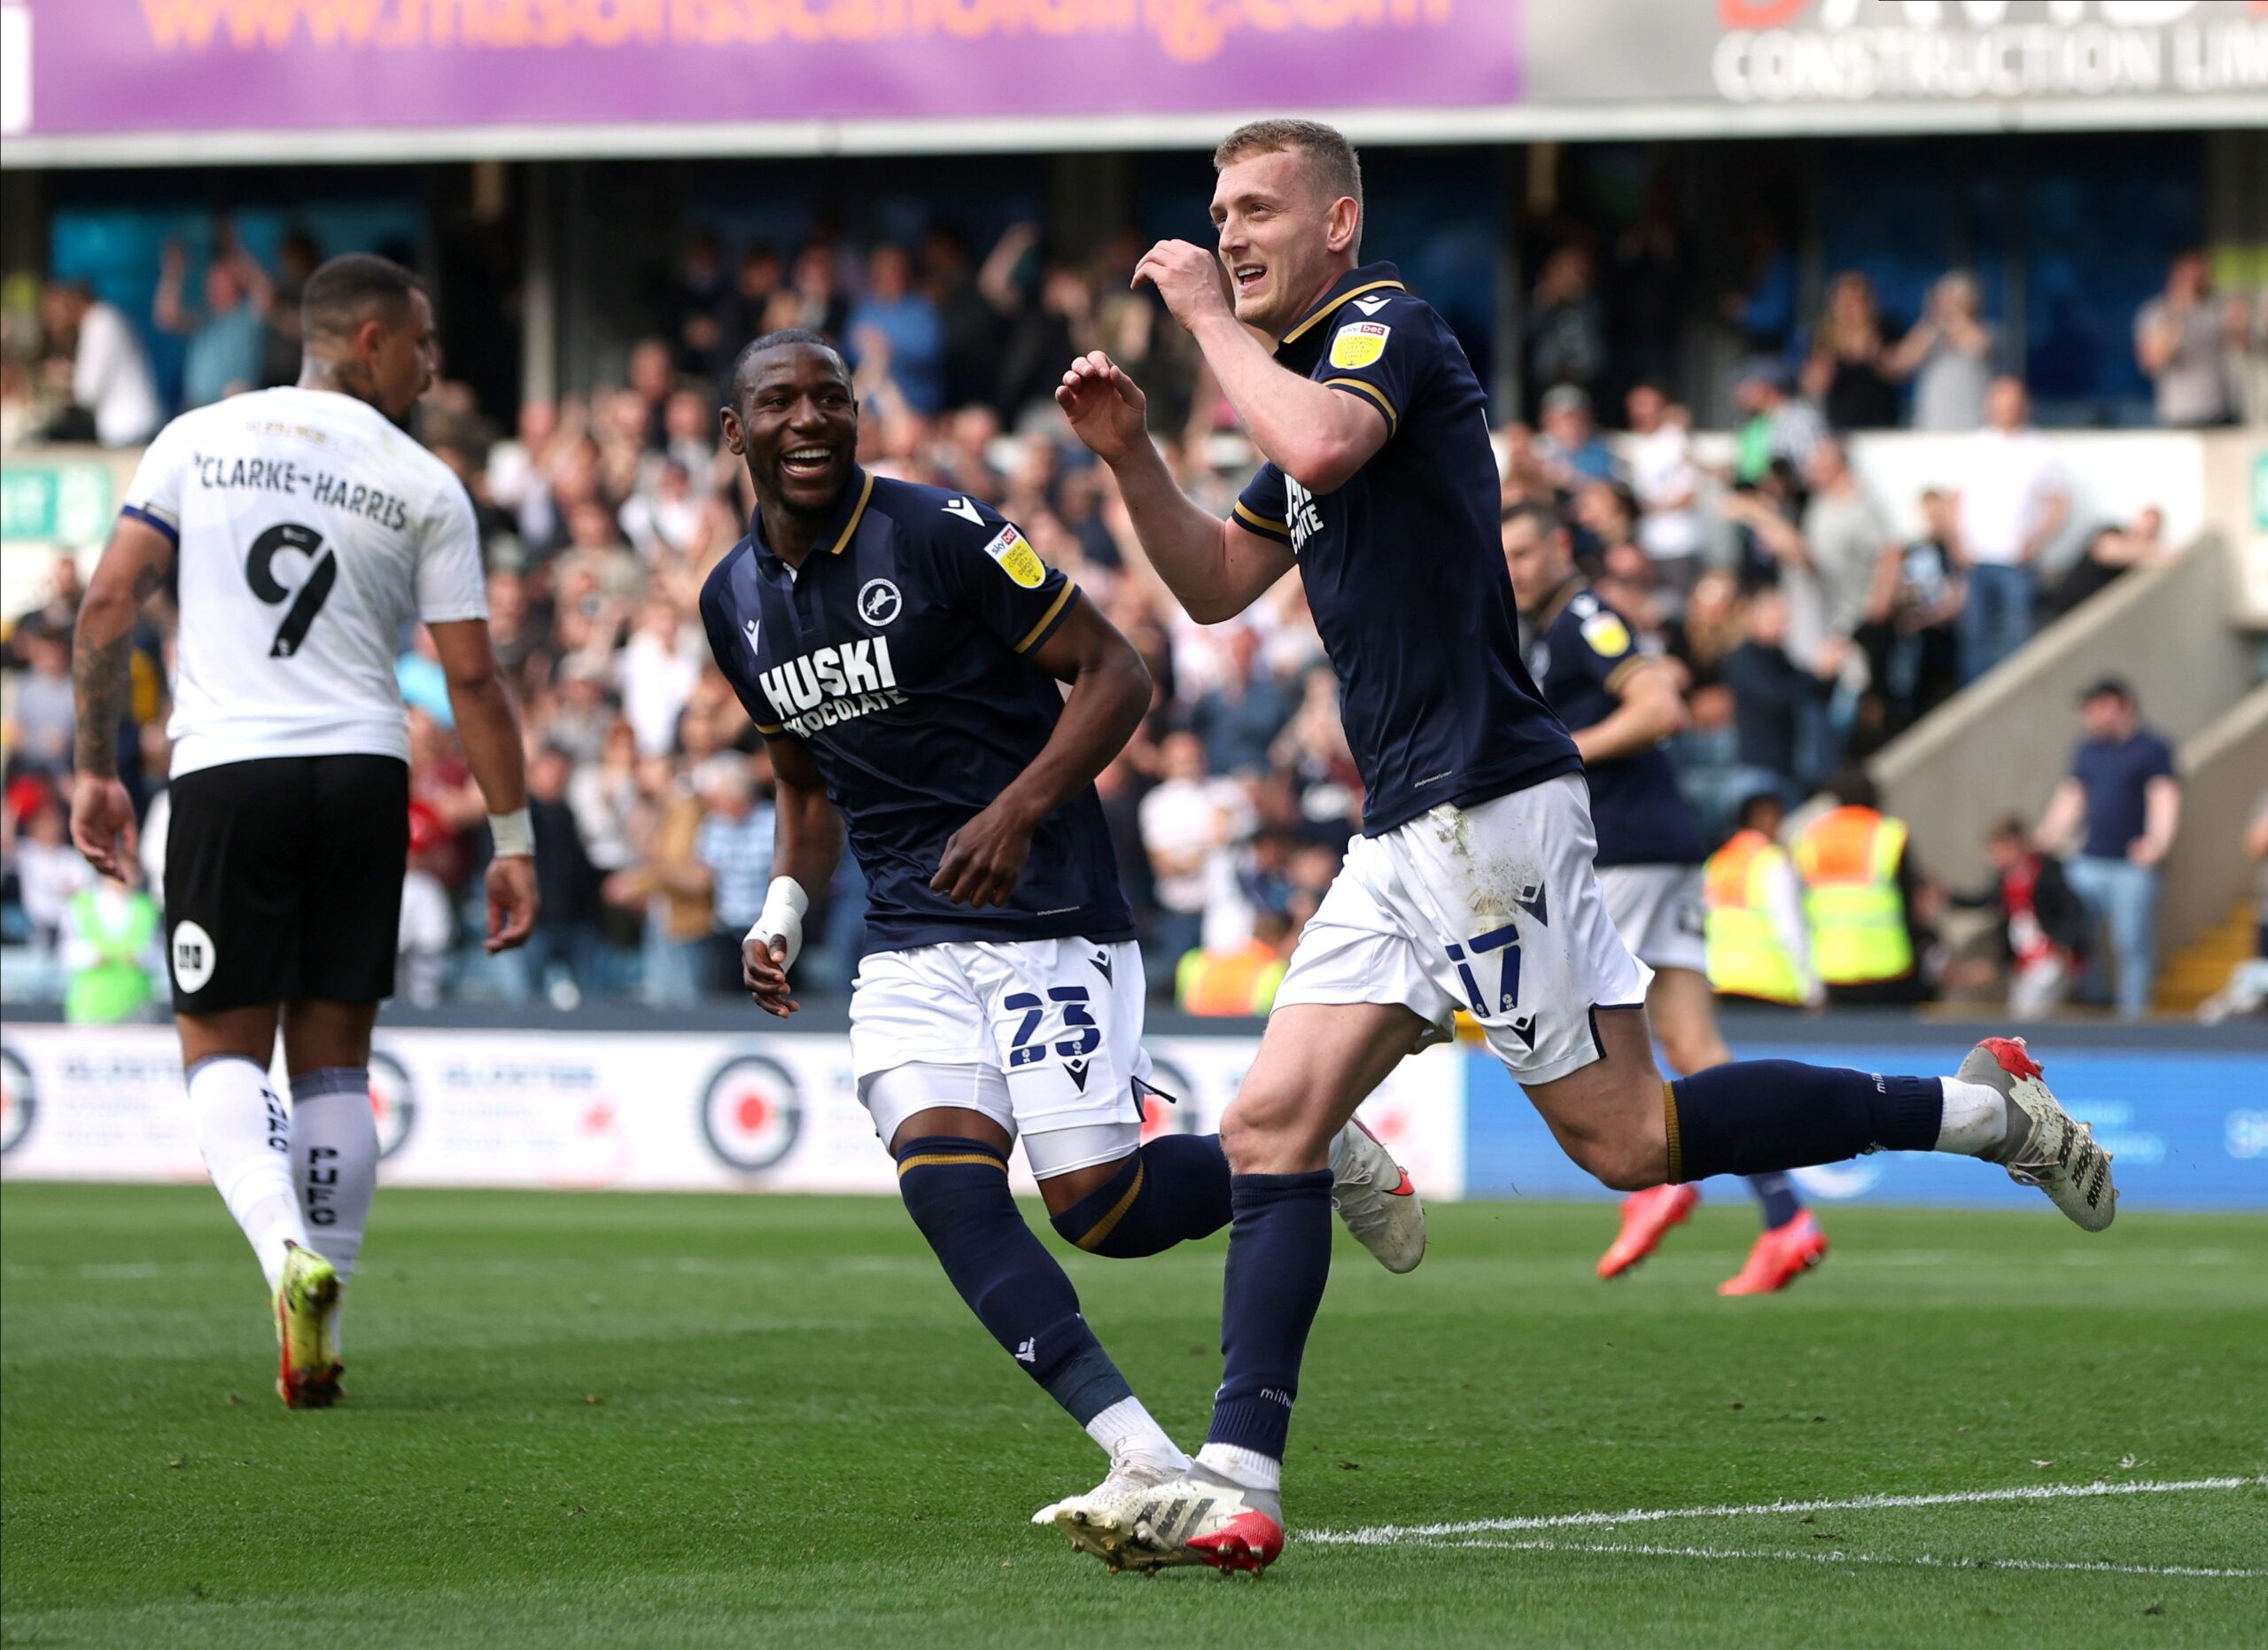 REPORT: Millwall 3-2 Sky Blues - News - Coventry City